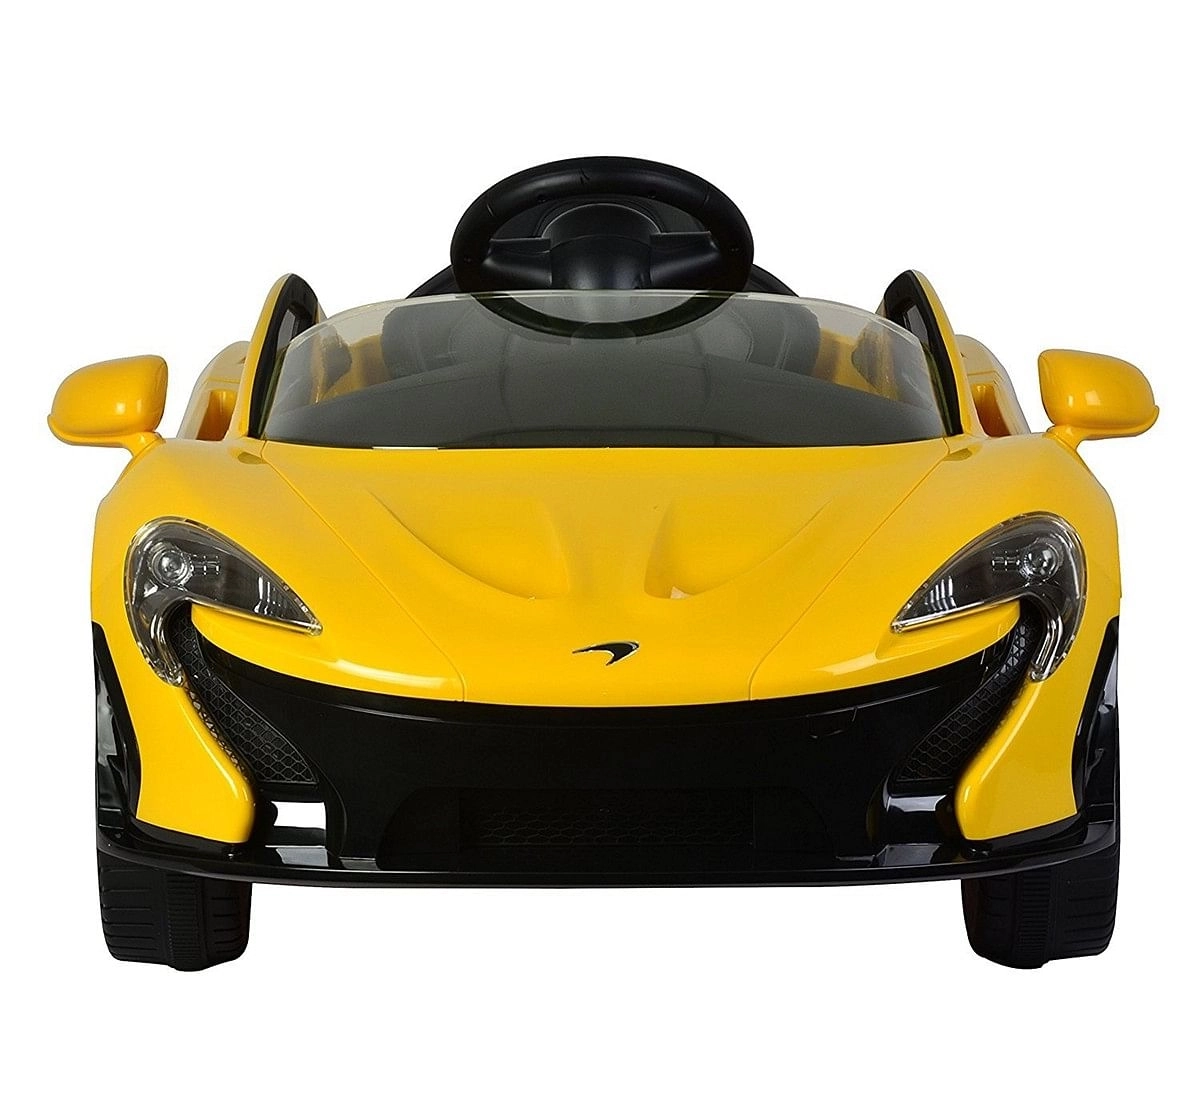 Chilokbo McLaren P1 Battery Operated Ride-on Car Yellow Battery Operated Rideons for Kids age 18M + (Yellow)